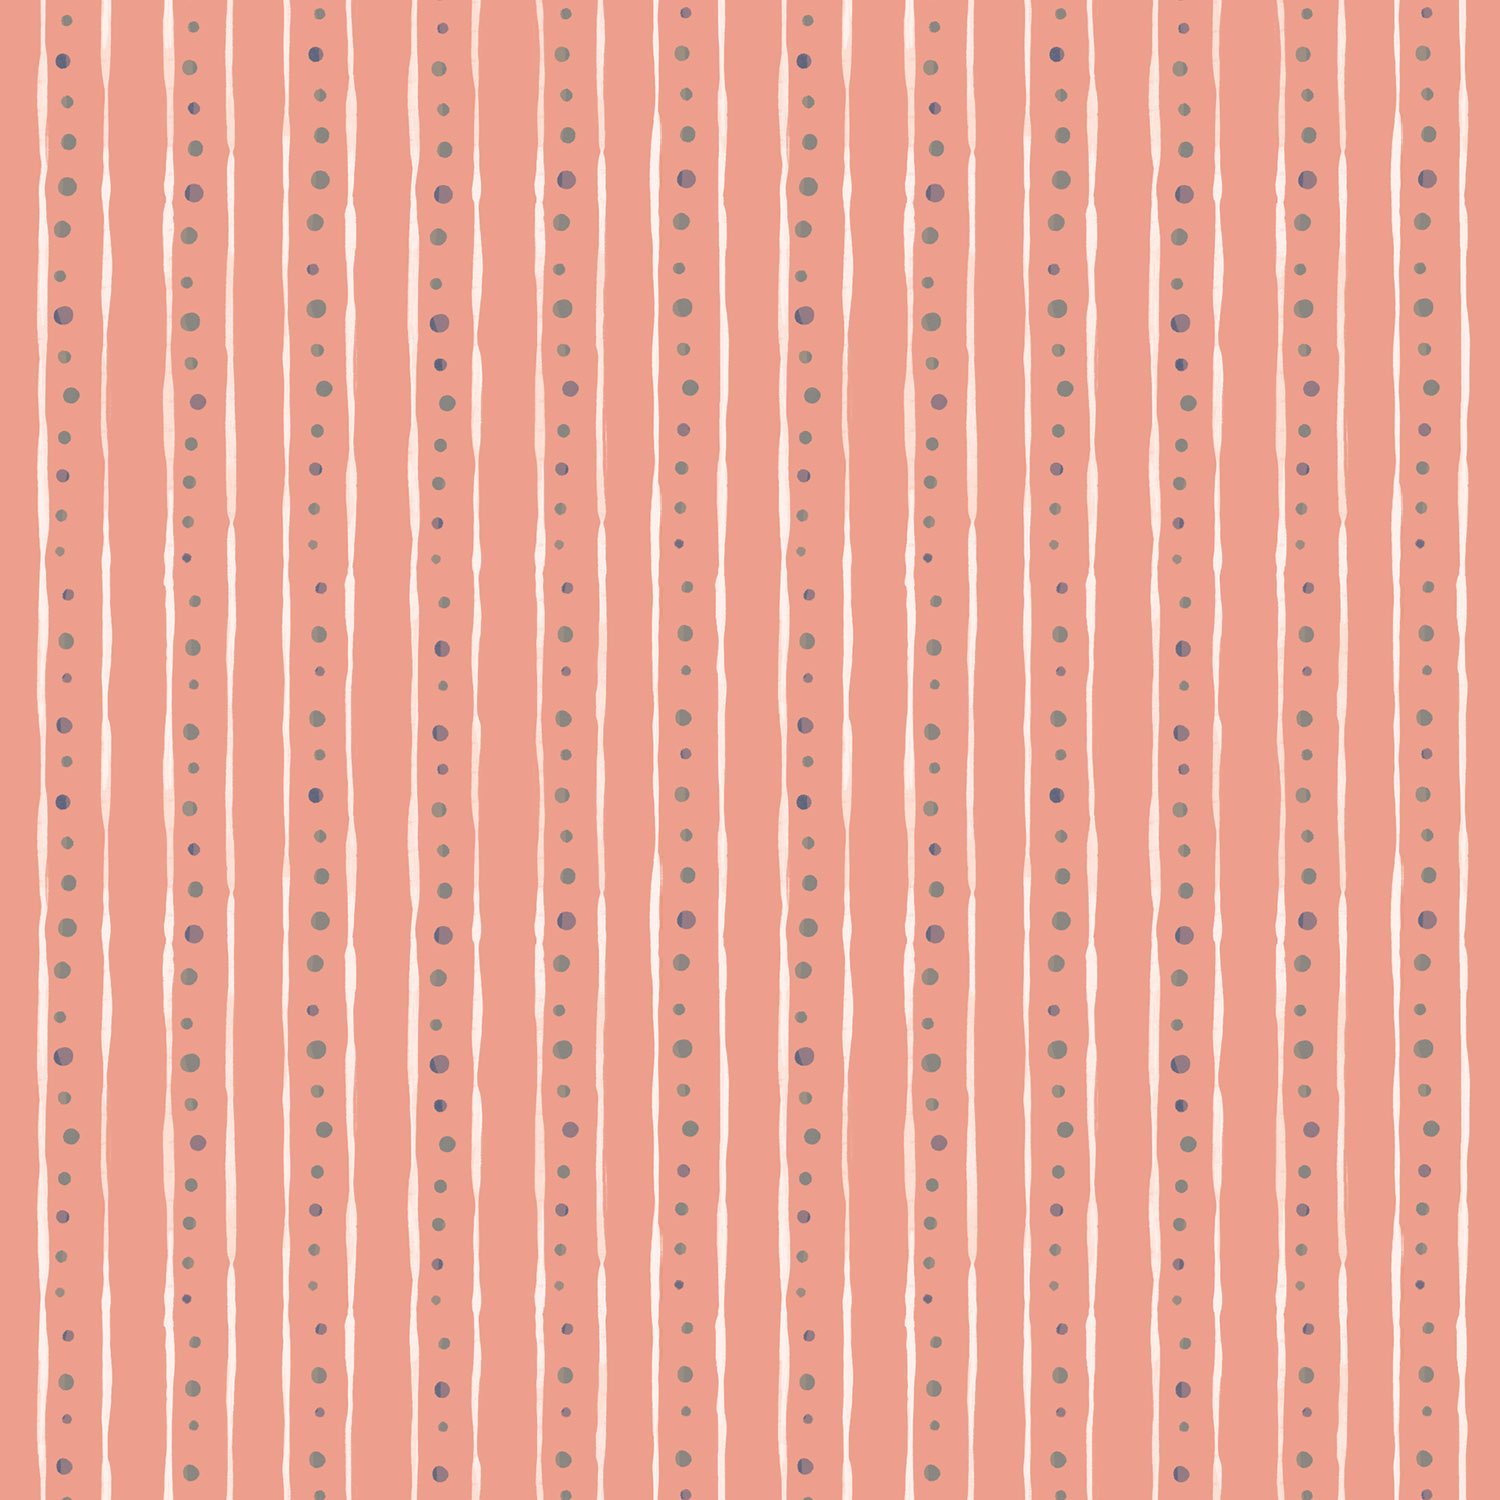 Inky Stripes with Dots in PEACH.jpg